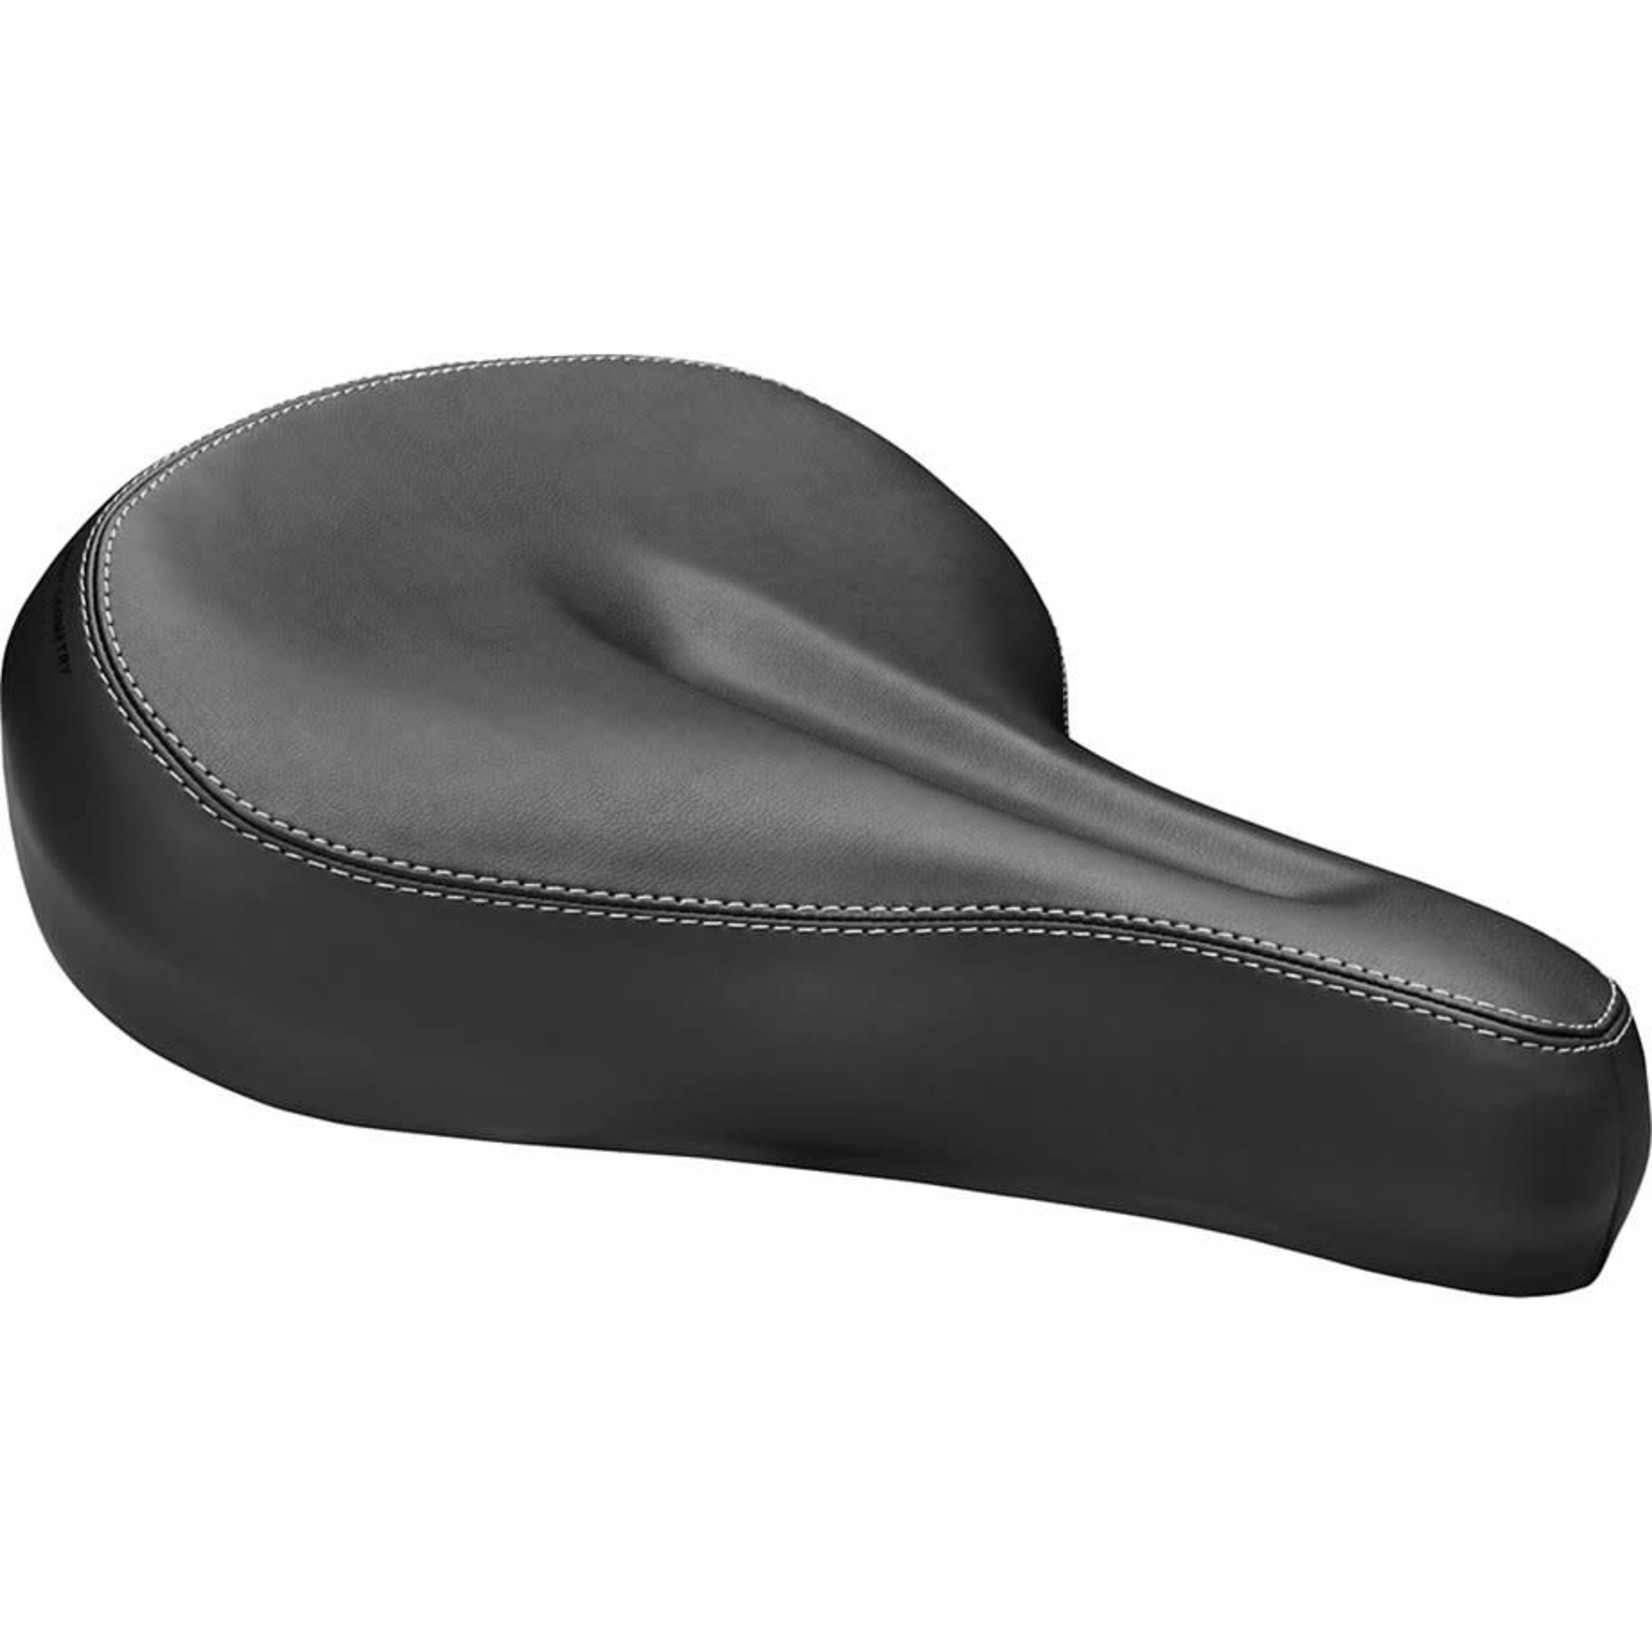 Specialized Specialized The Cup Saddle, Black